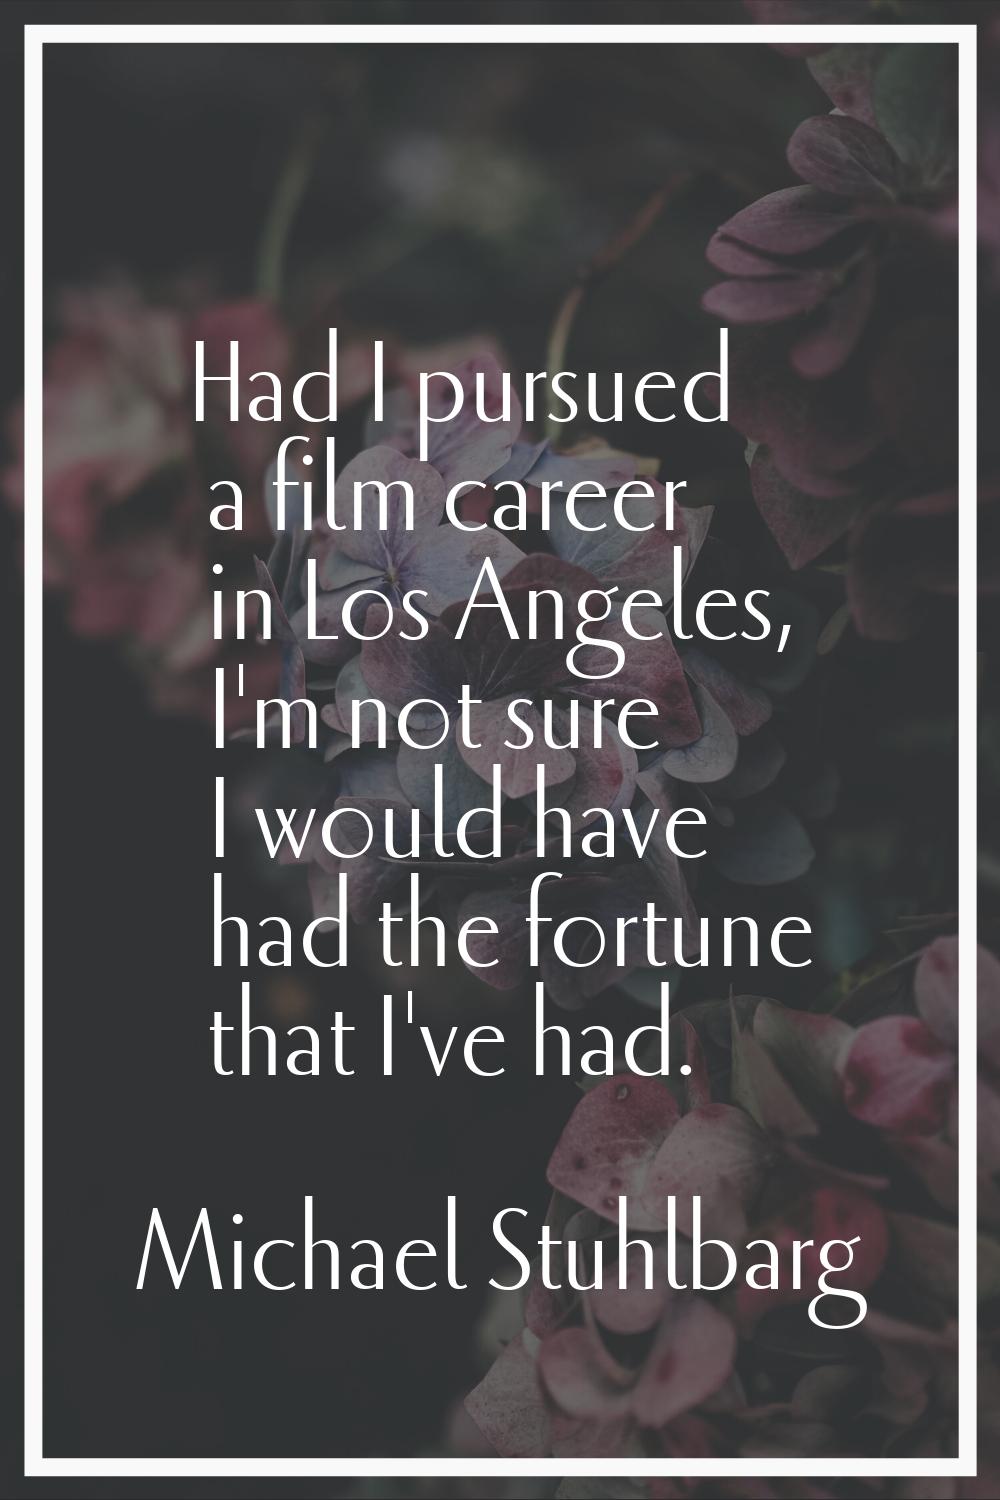 Had I pursued a film career in Los Angeles, I'm not sure I would have had the fortune that I've had